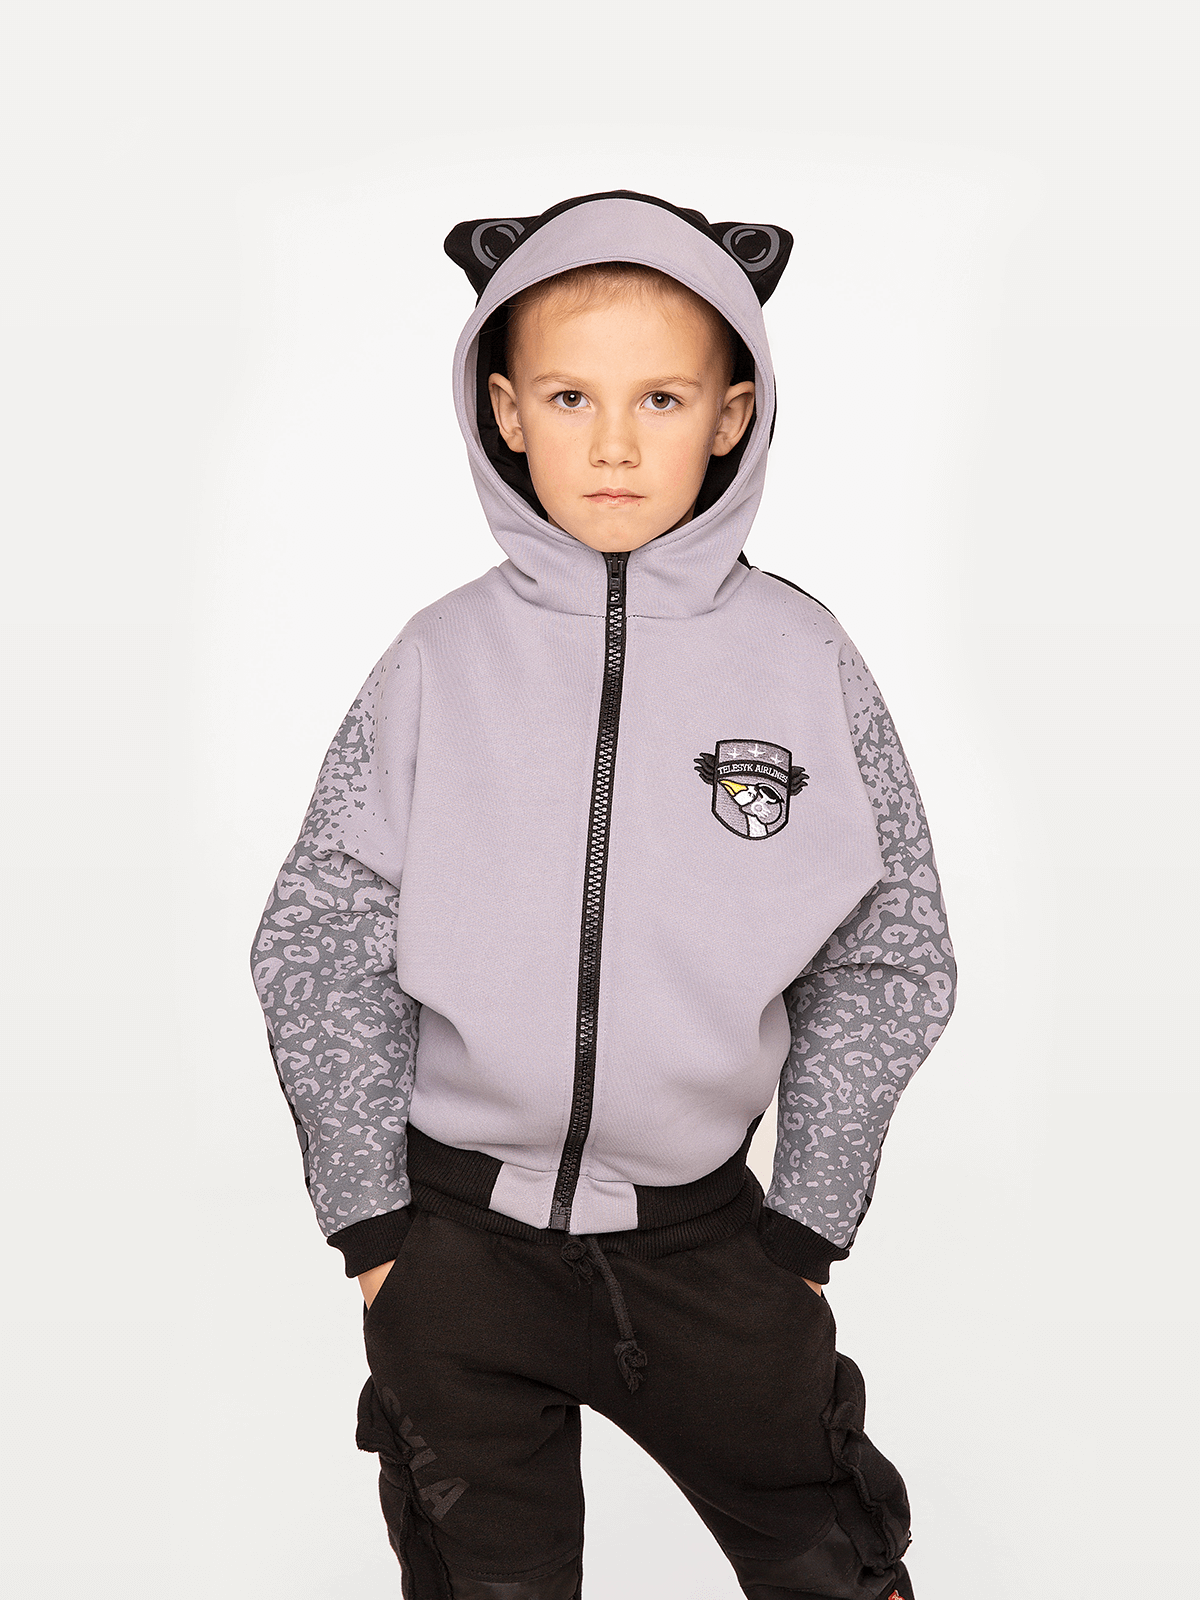 Kids Hoodie Stingray. Color gray. Hoodie: unisex, well suited for both boys and girls.